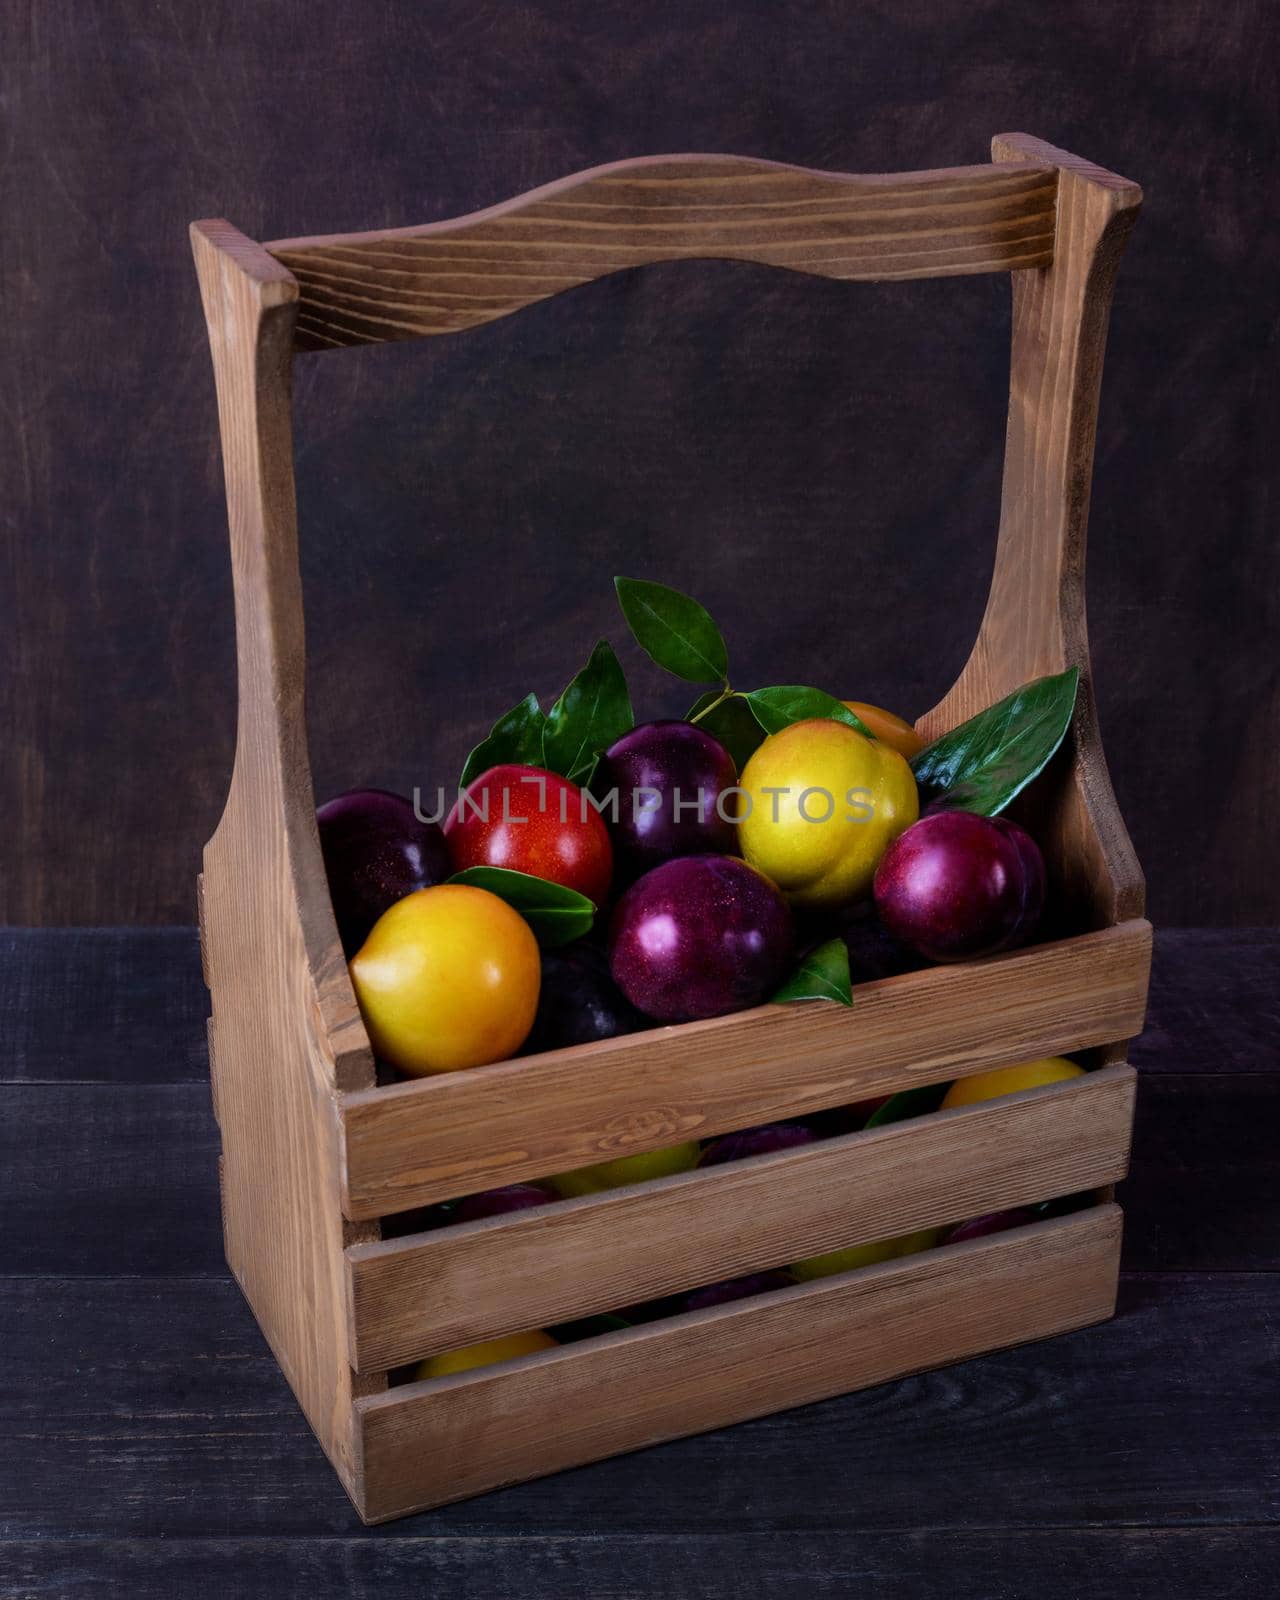 Colorful plums fruit in a wood basket on the black background isolated